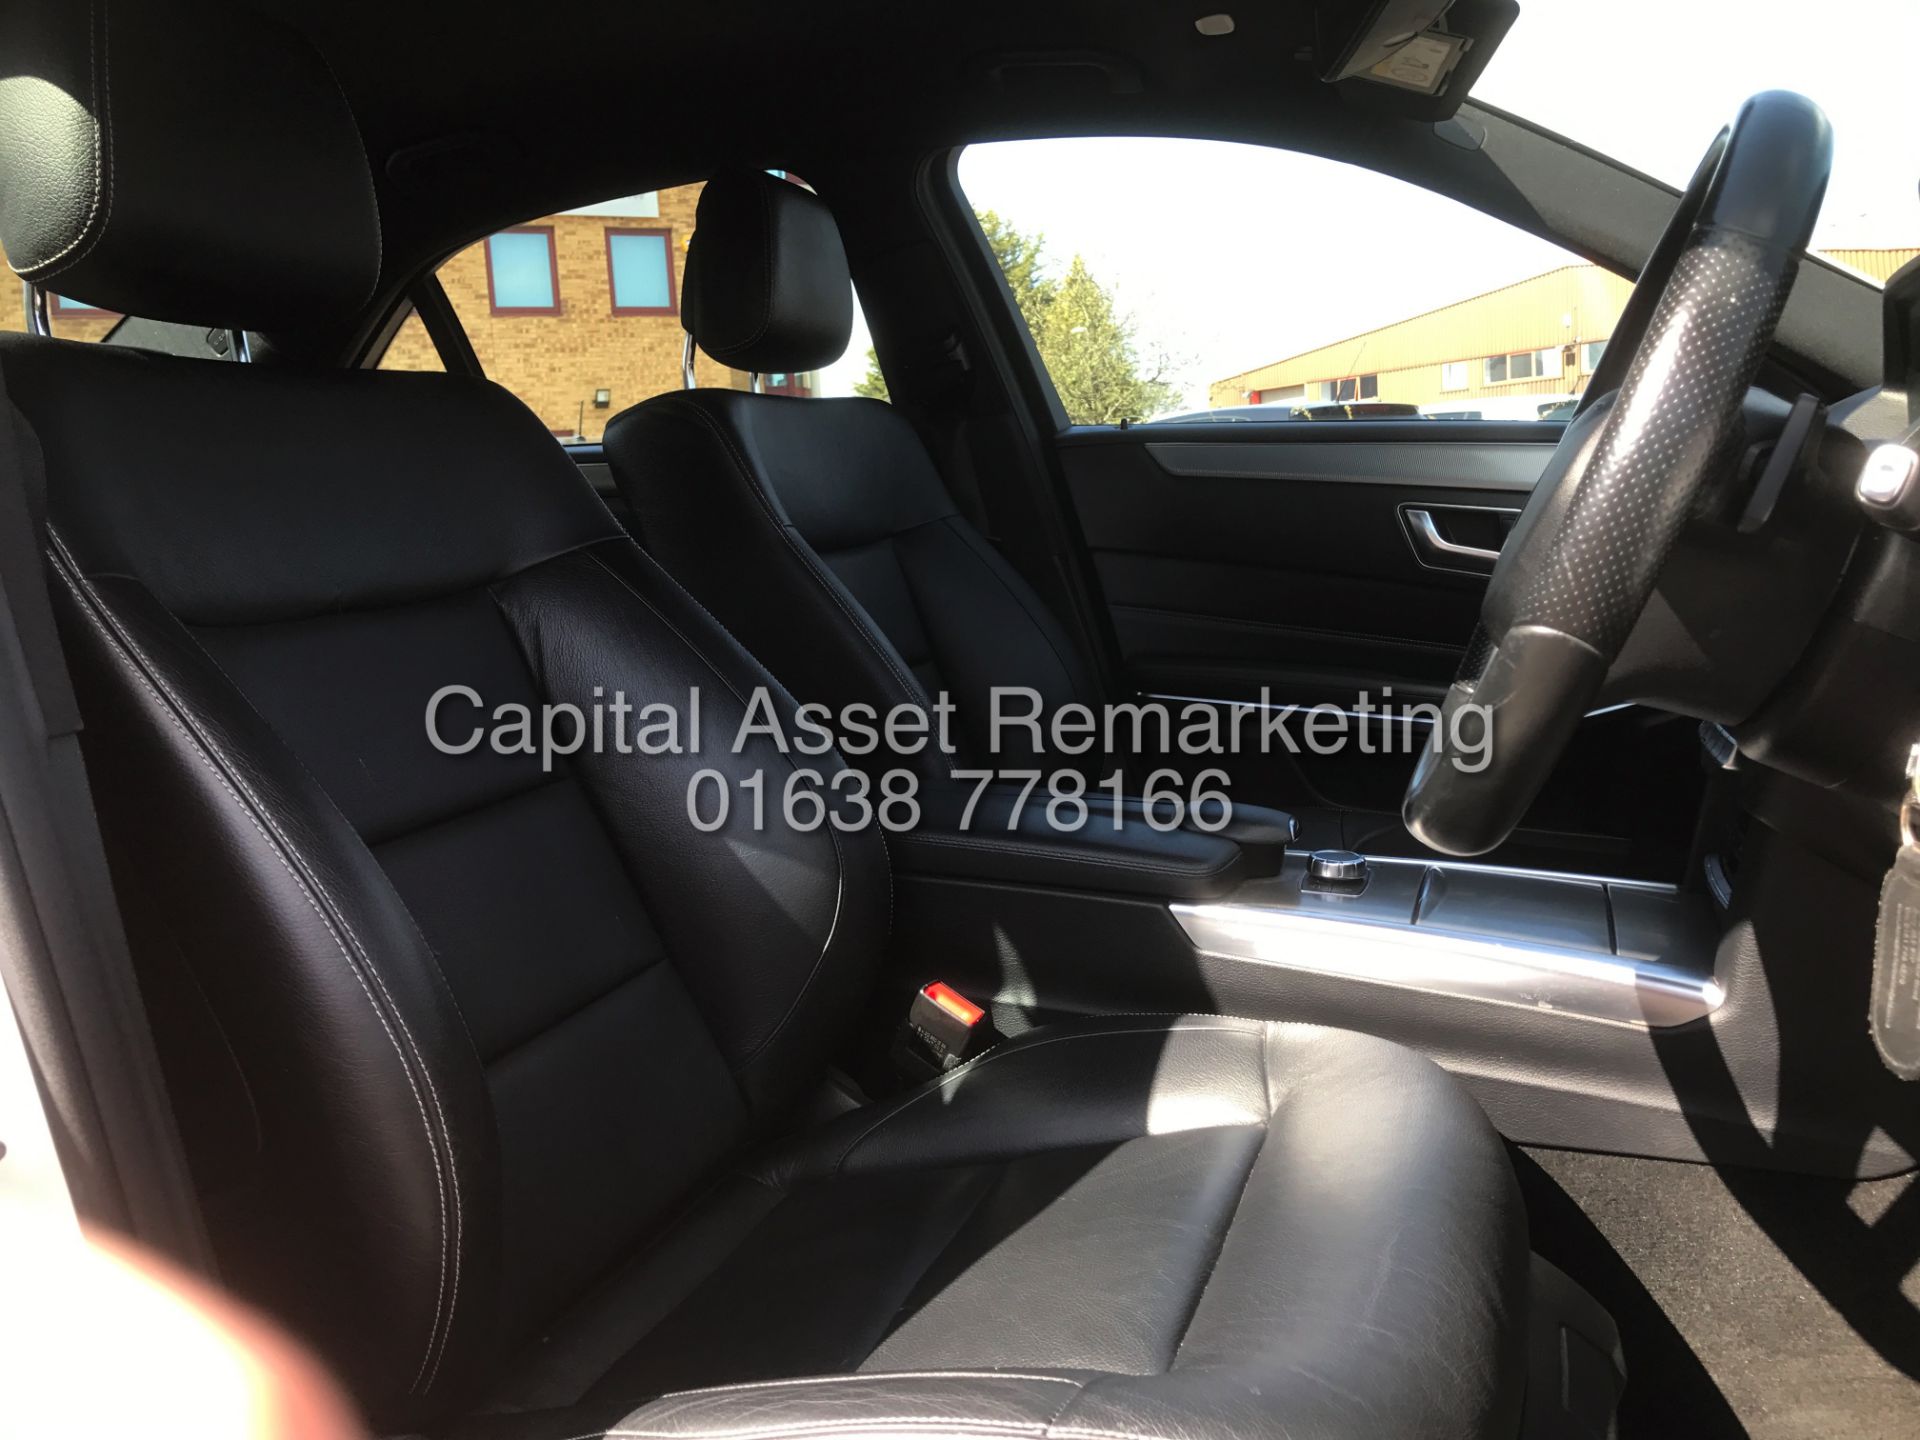 On Sale MERCEDES E220CDI "AMG NIGHT EDITION" 7G TRONIC (2016 MODEL) 1 OWNER - SAT NAV - LEATHER - Image 12 of 23